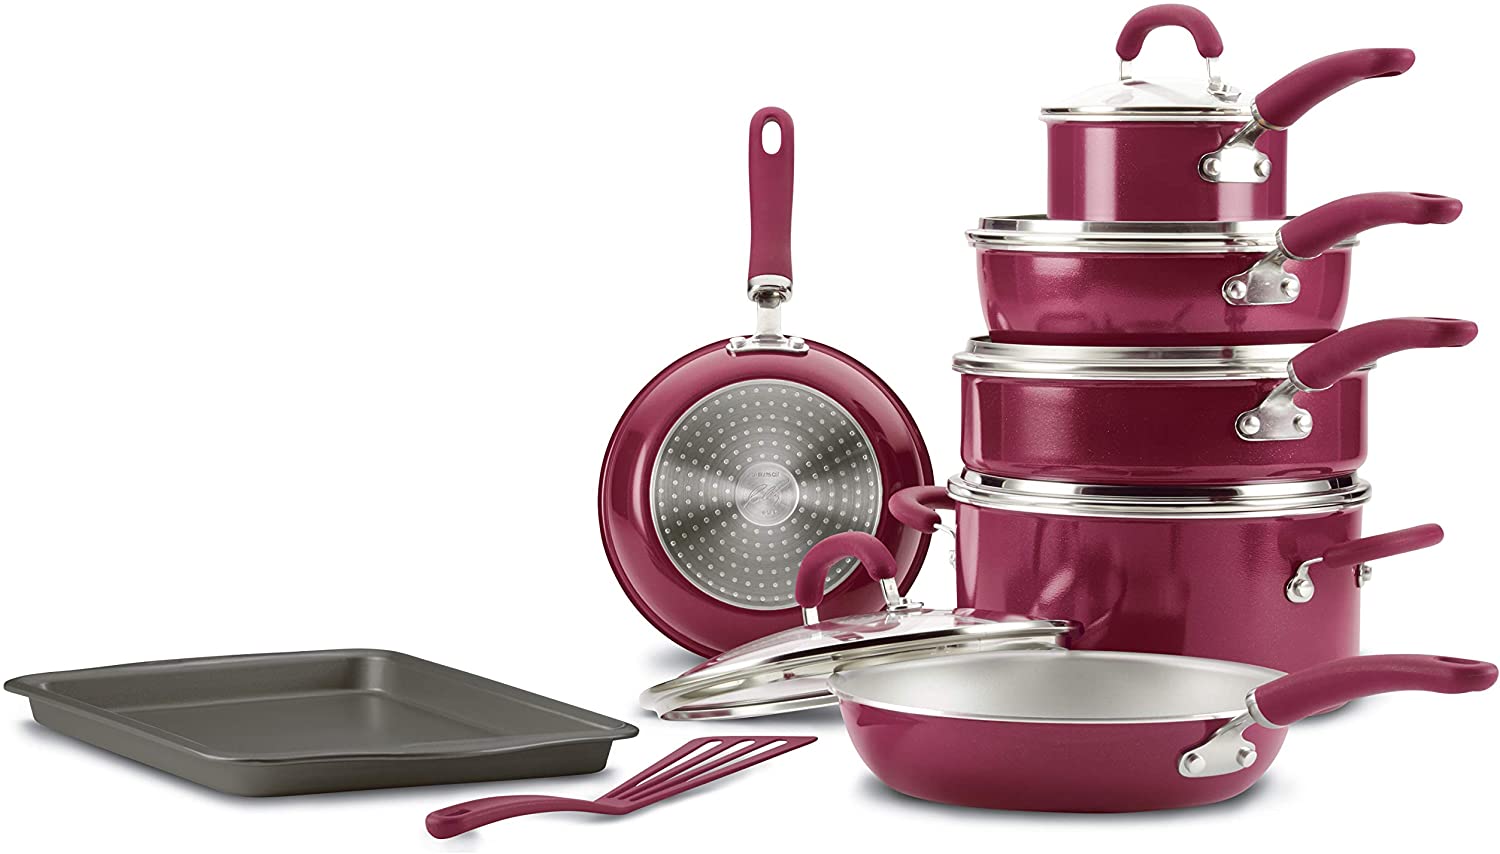  Rachael Ray Cucina Nonstick Cookware Pots and Pans Set, 12  Piece, Cranberry Red